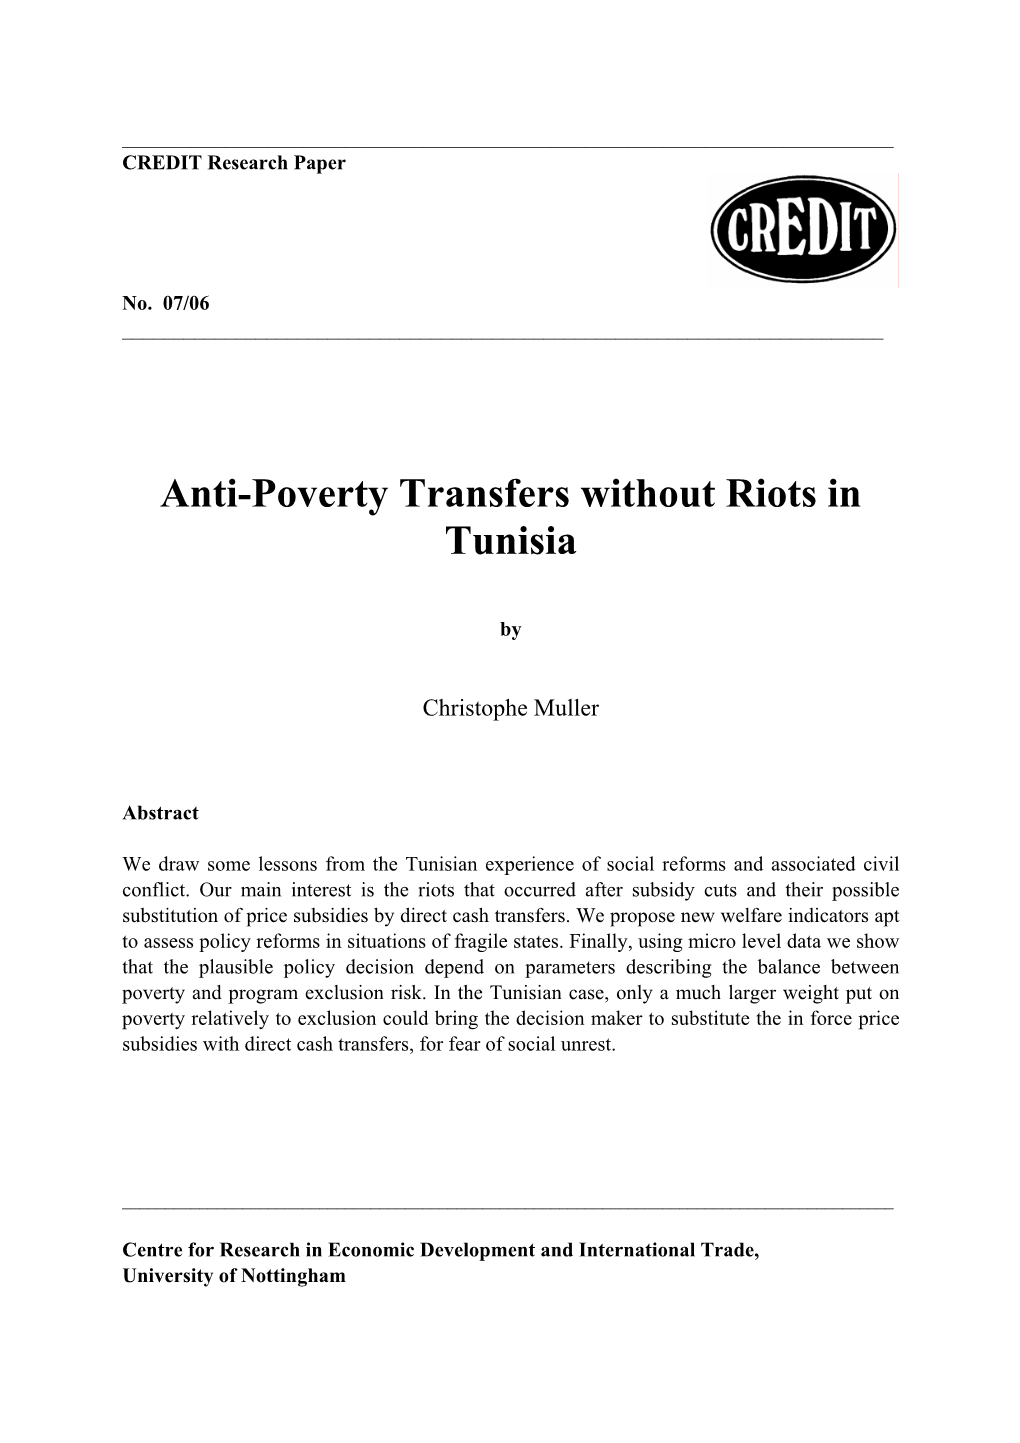 Anti-Poverty Transfers Without Riots in Tunisia